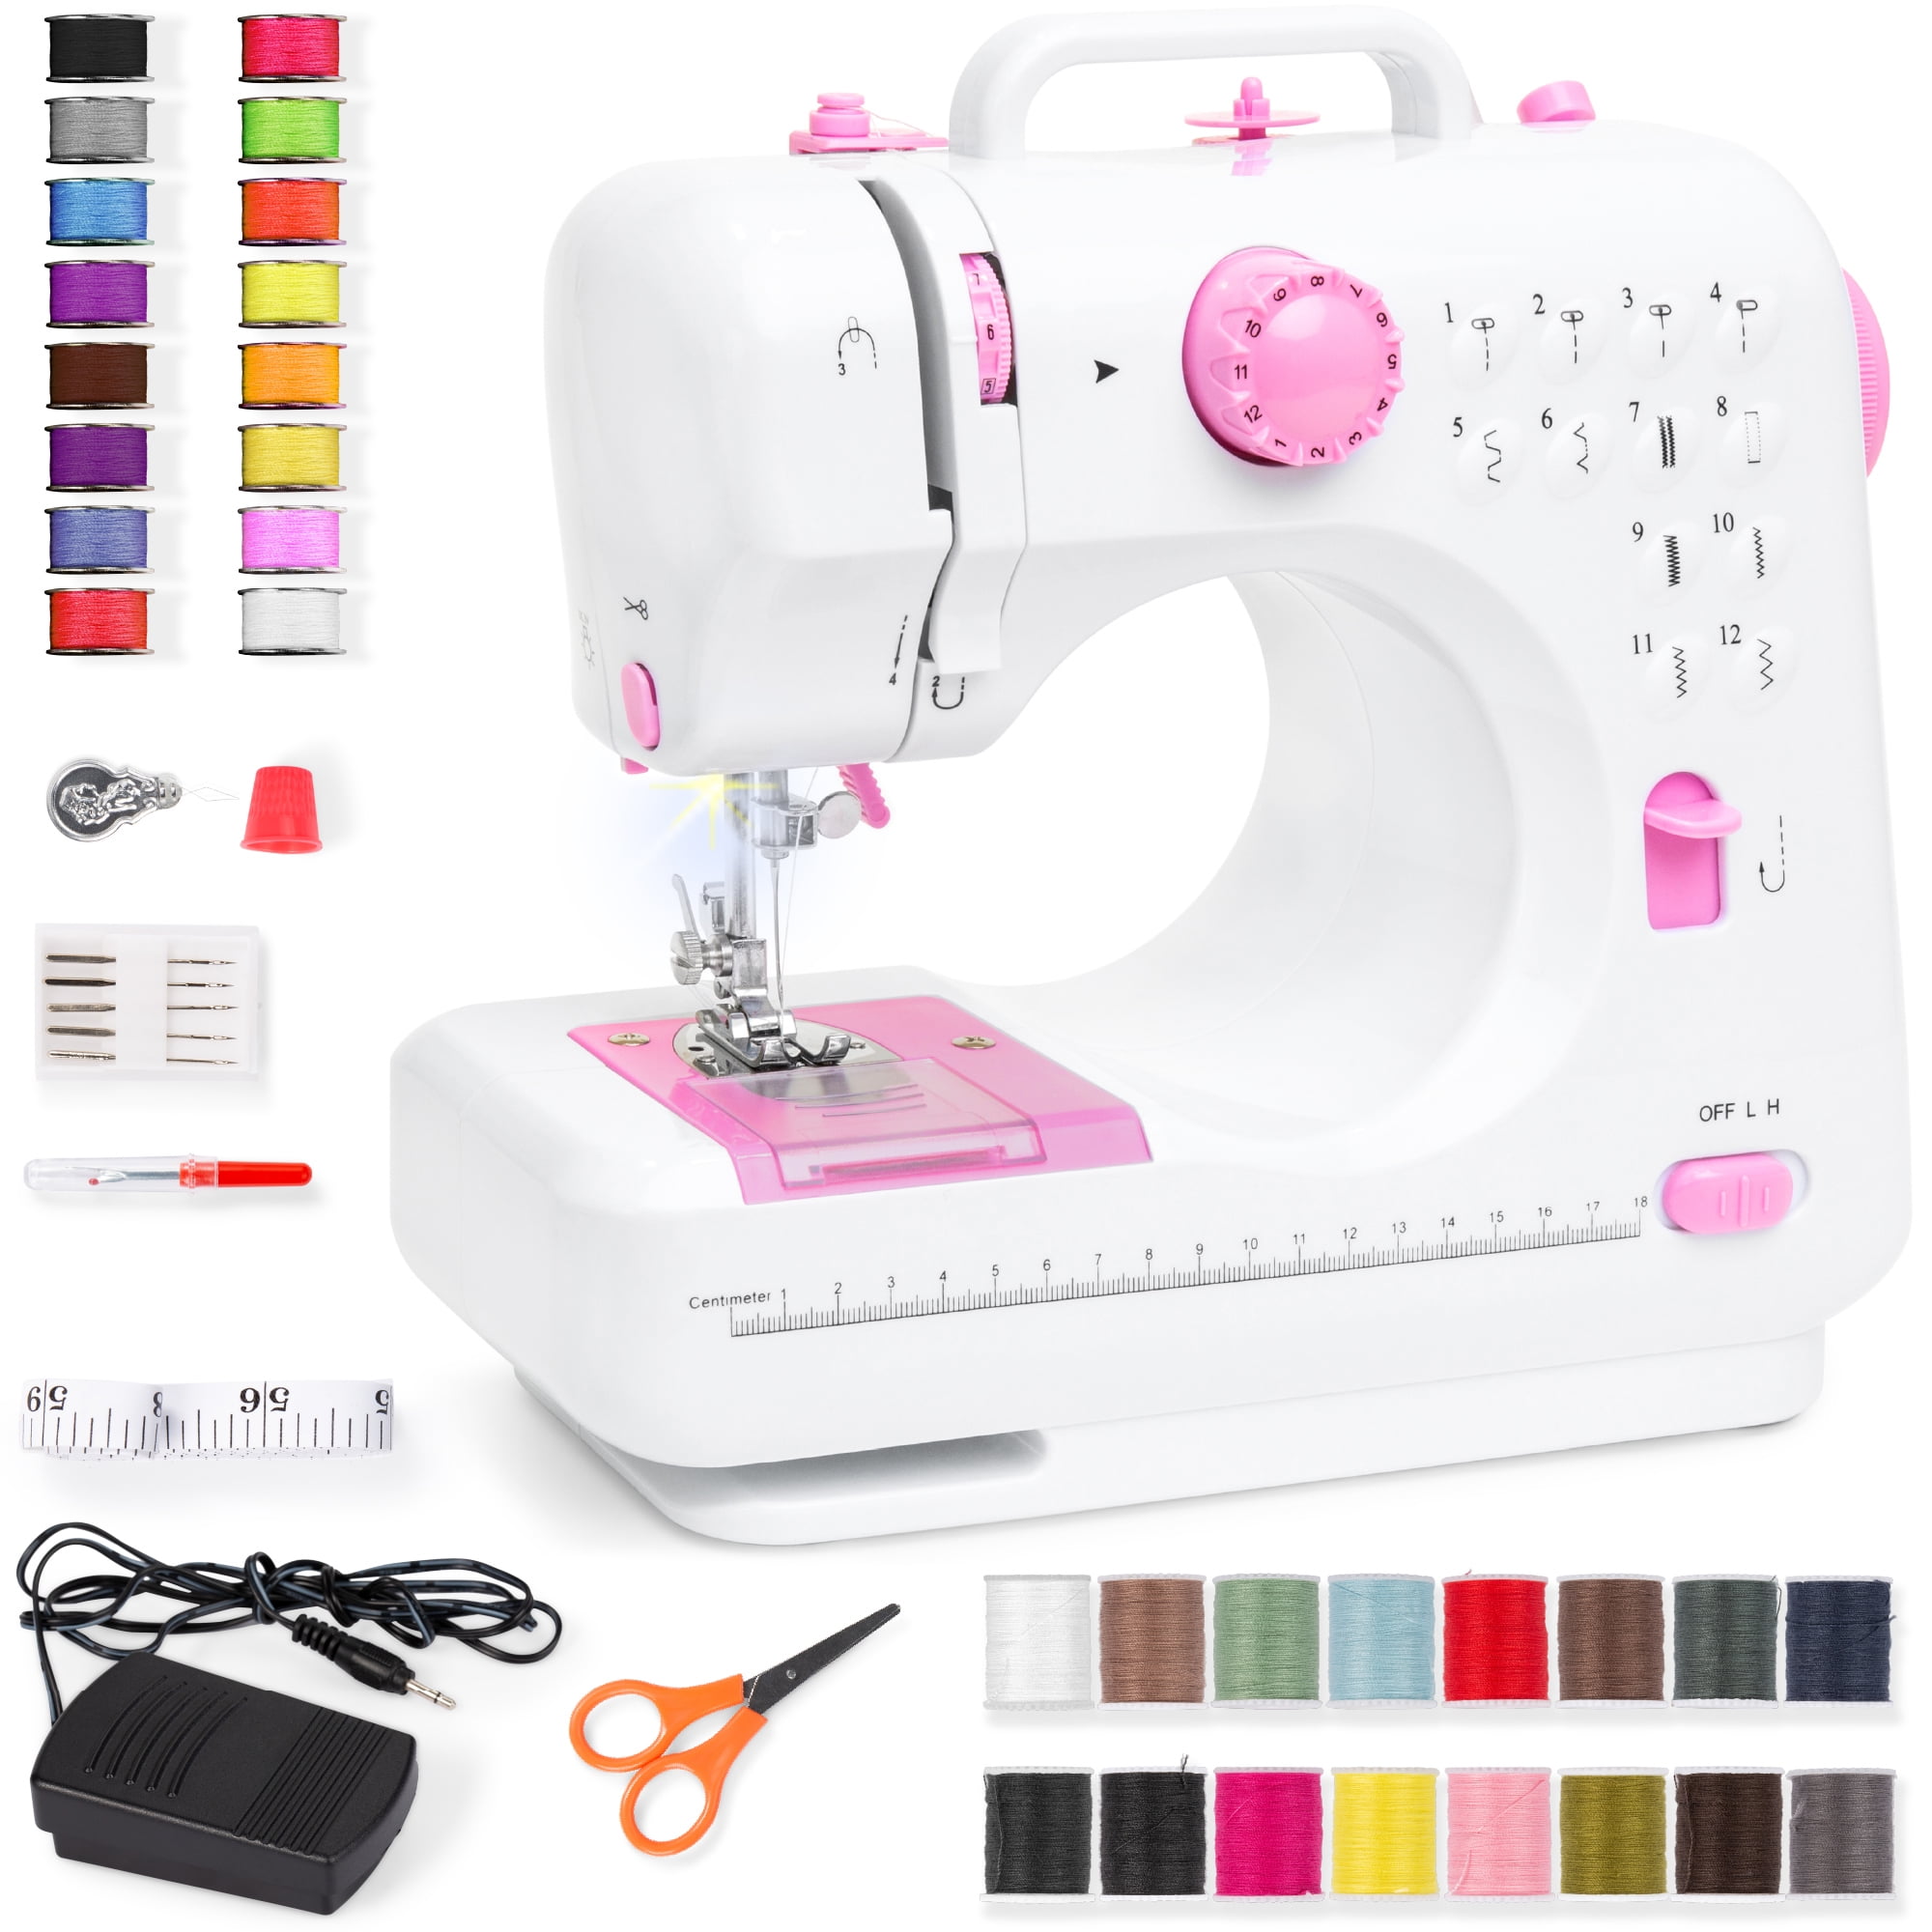 Do you have these 12 essential accessories for your sewing machine?